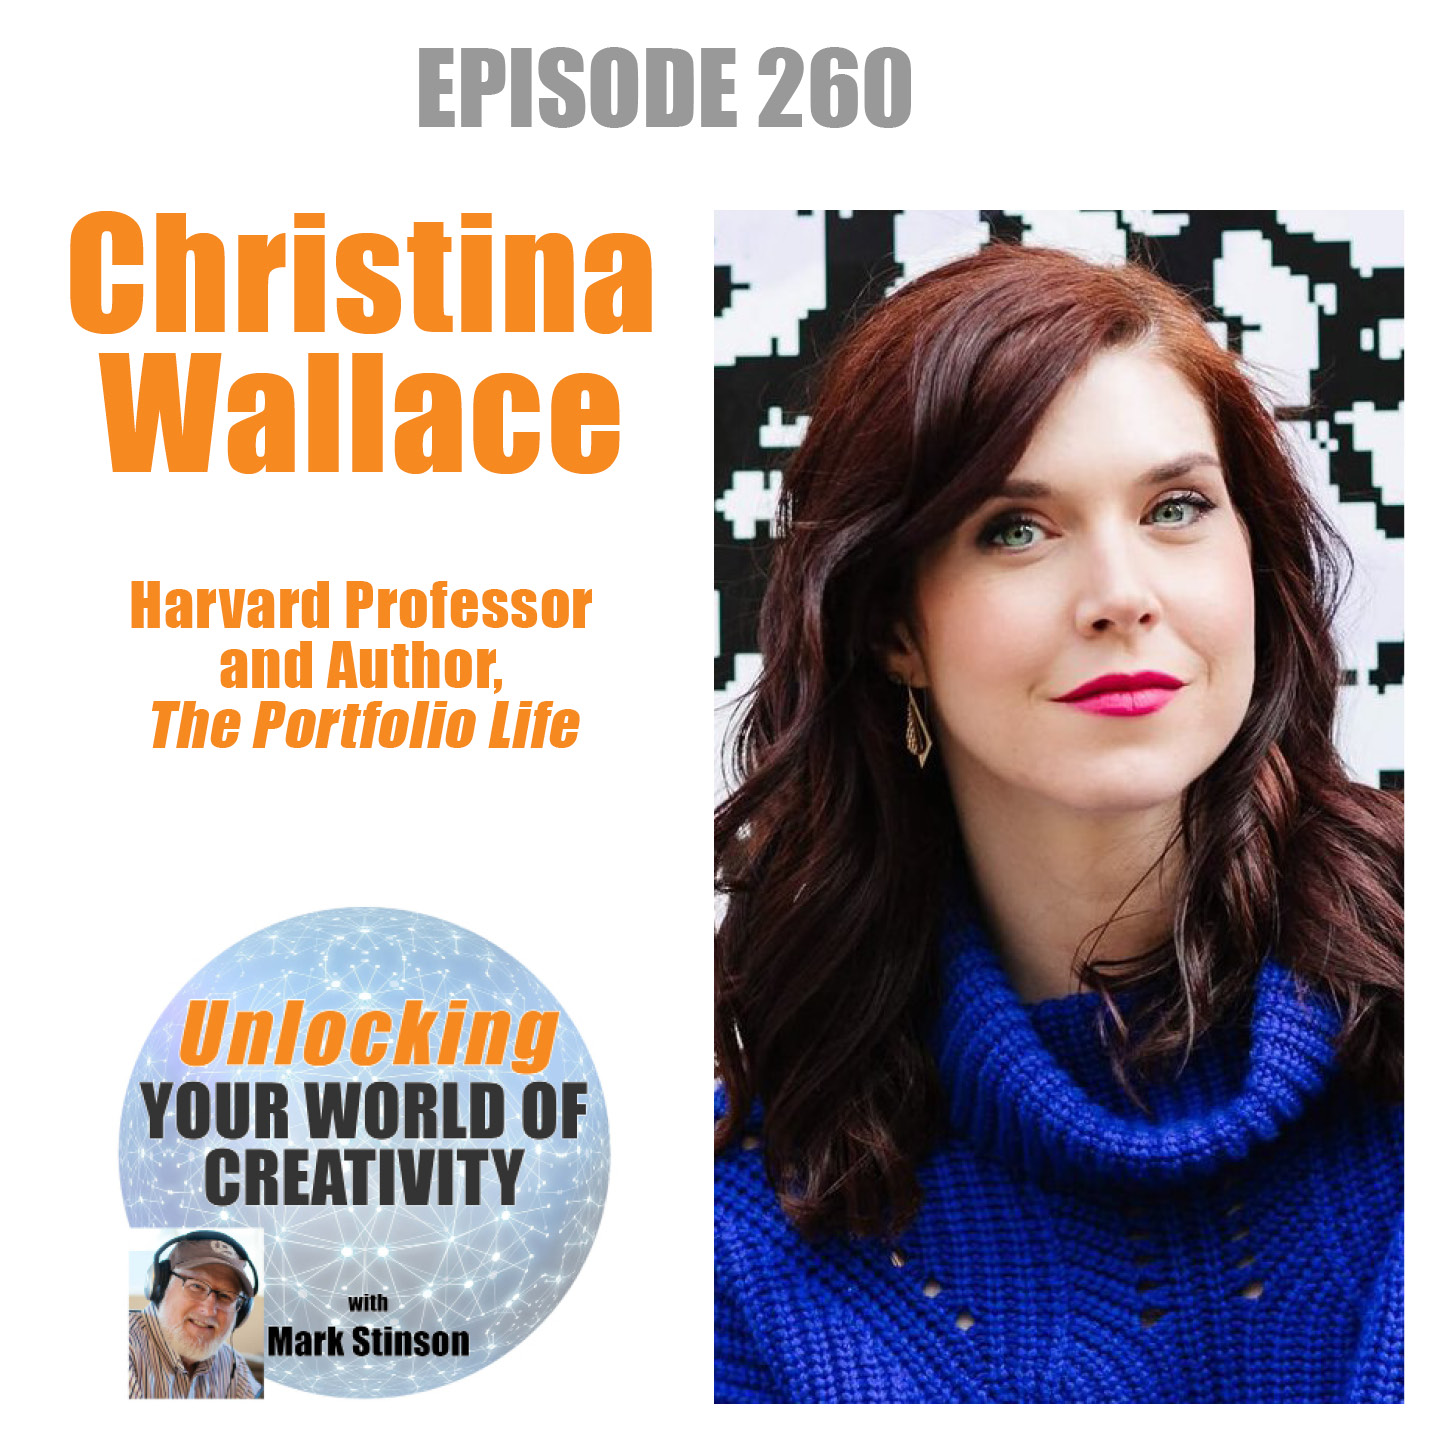 Christina Wallace, Lecturer and Author, THE PORTFOLIO LIFE